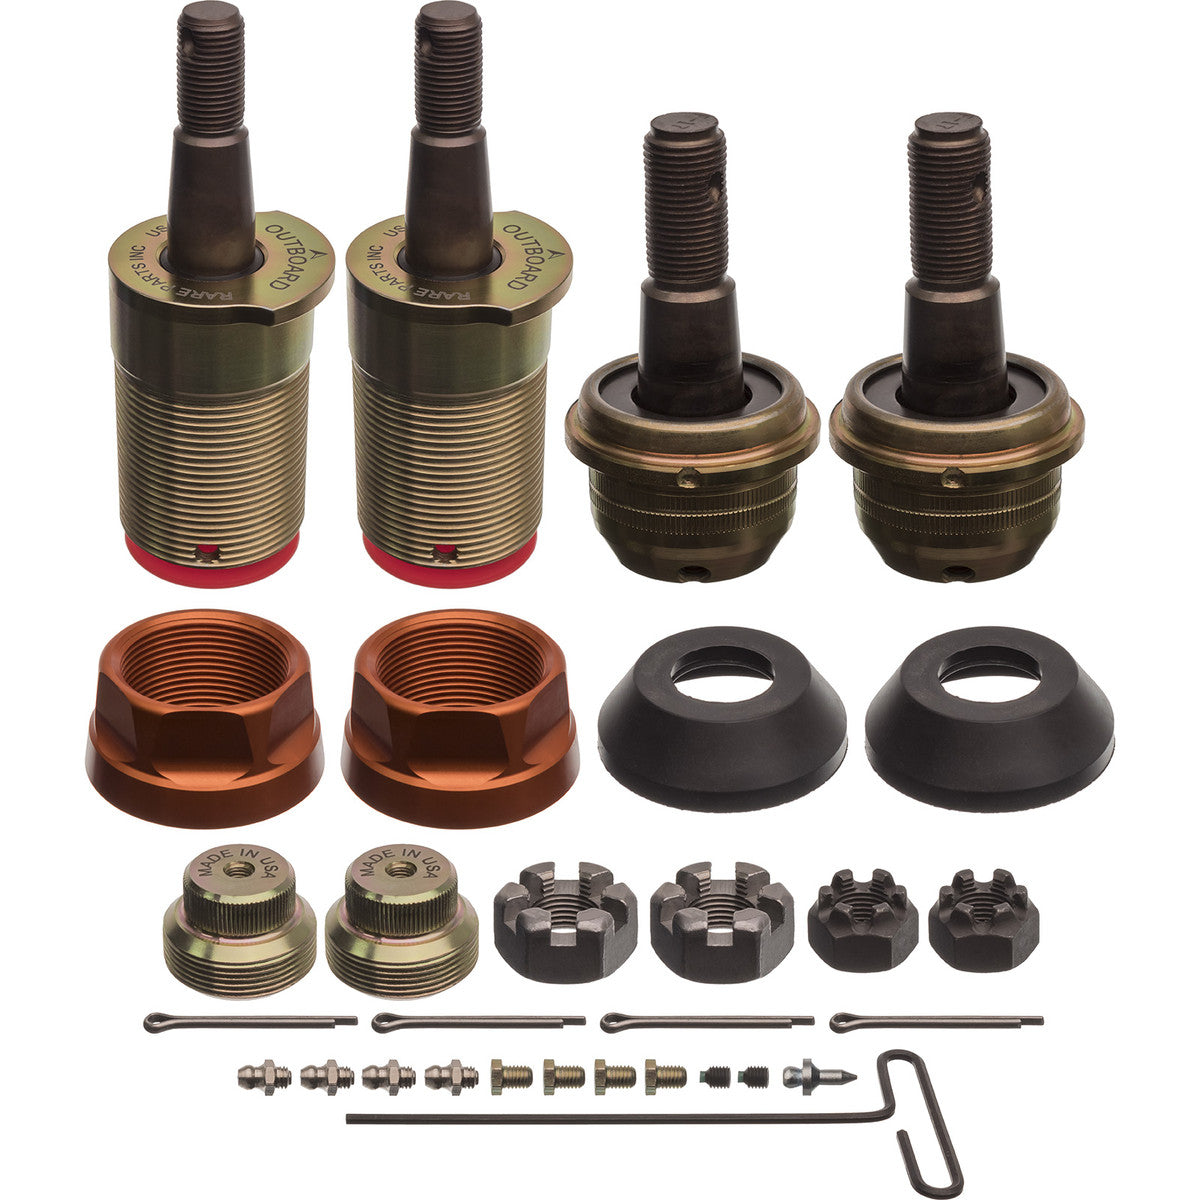 DUAL LOAD CARRYING BALL JOINT KIT - OVERSIZED (TJ)